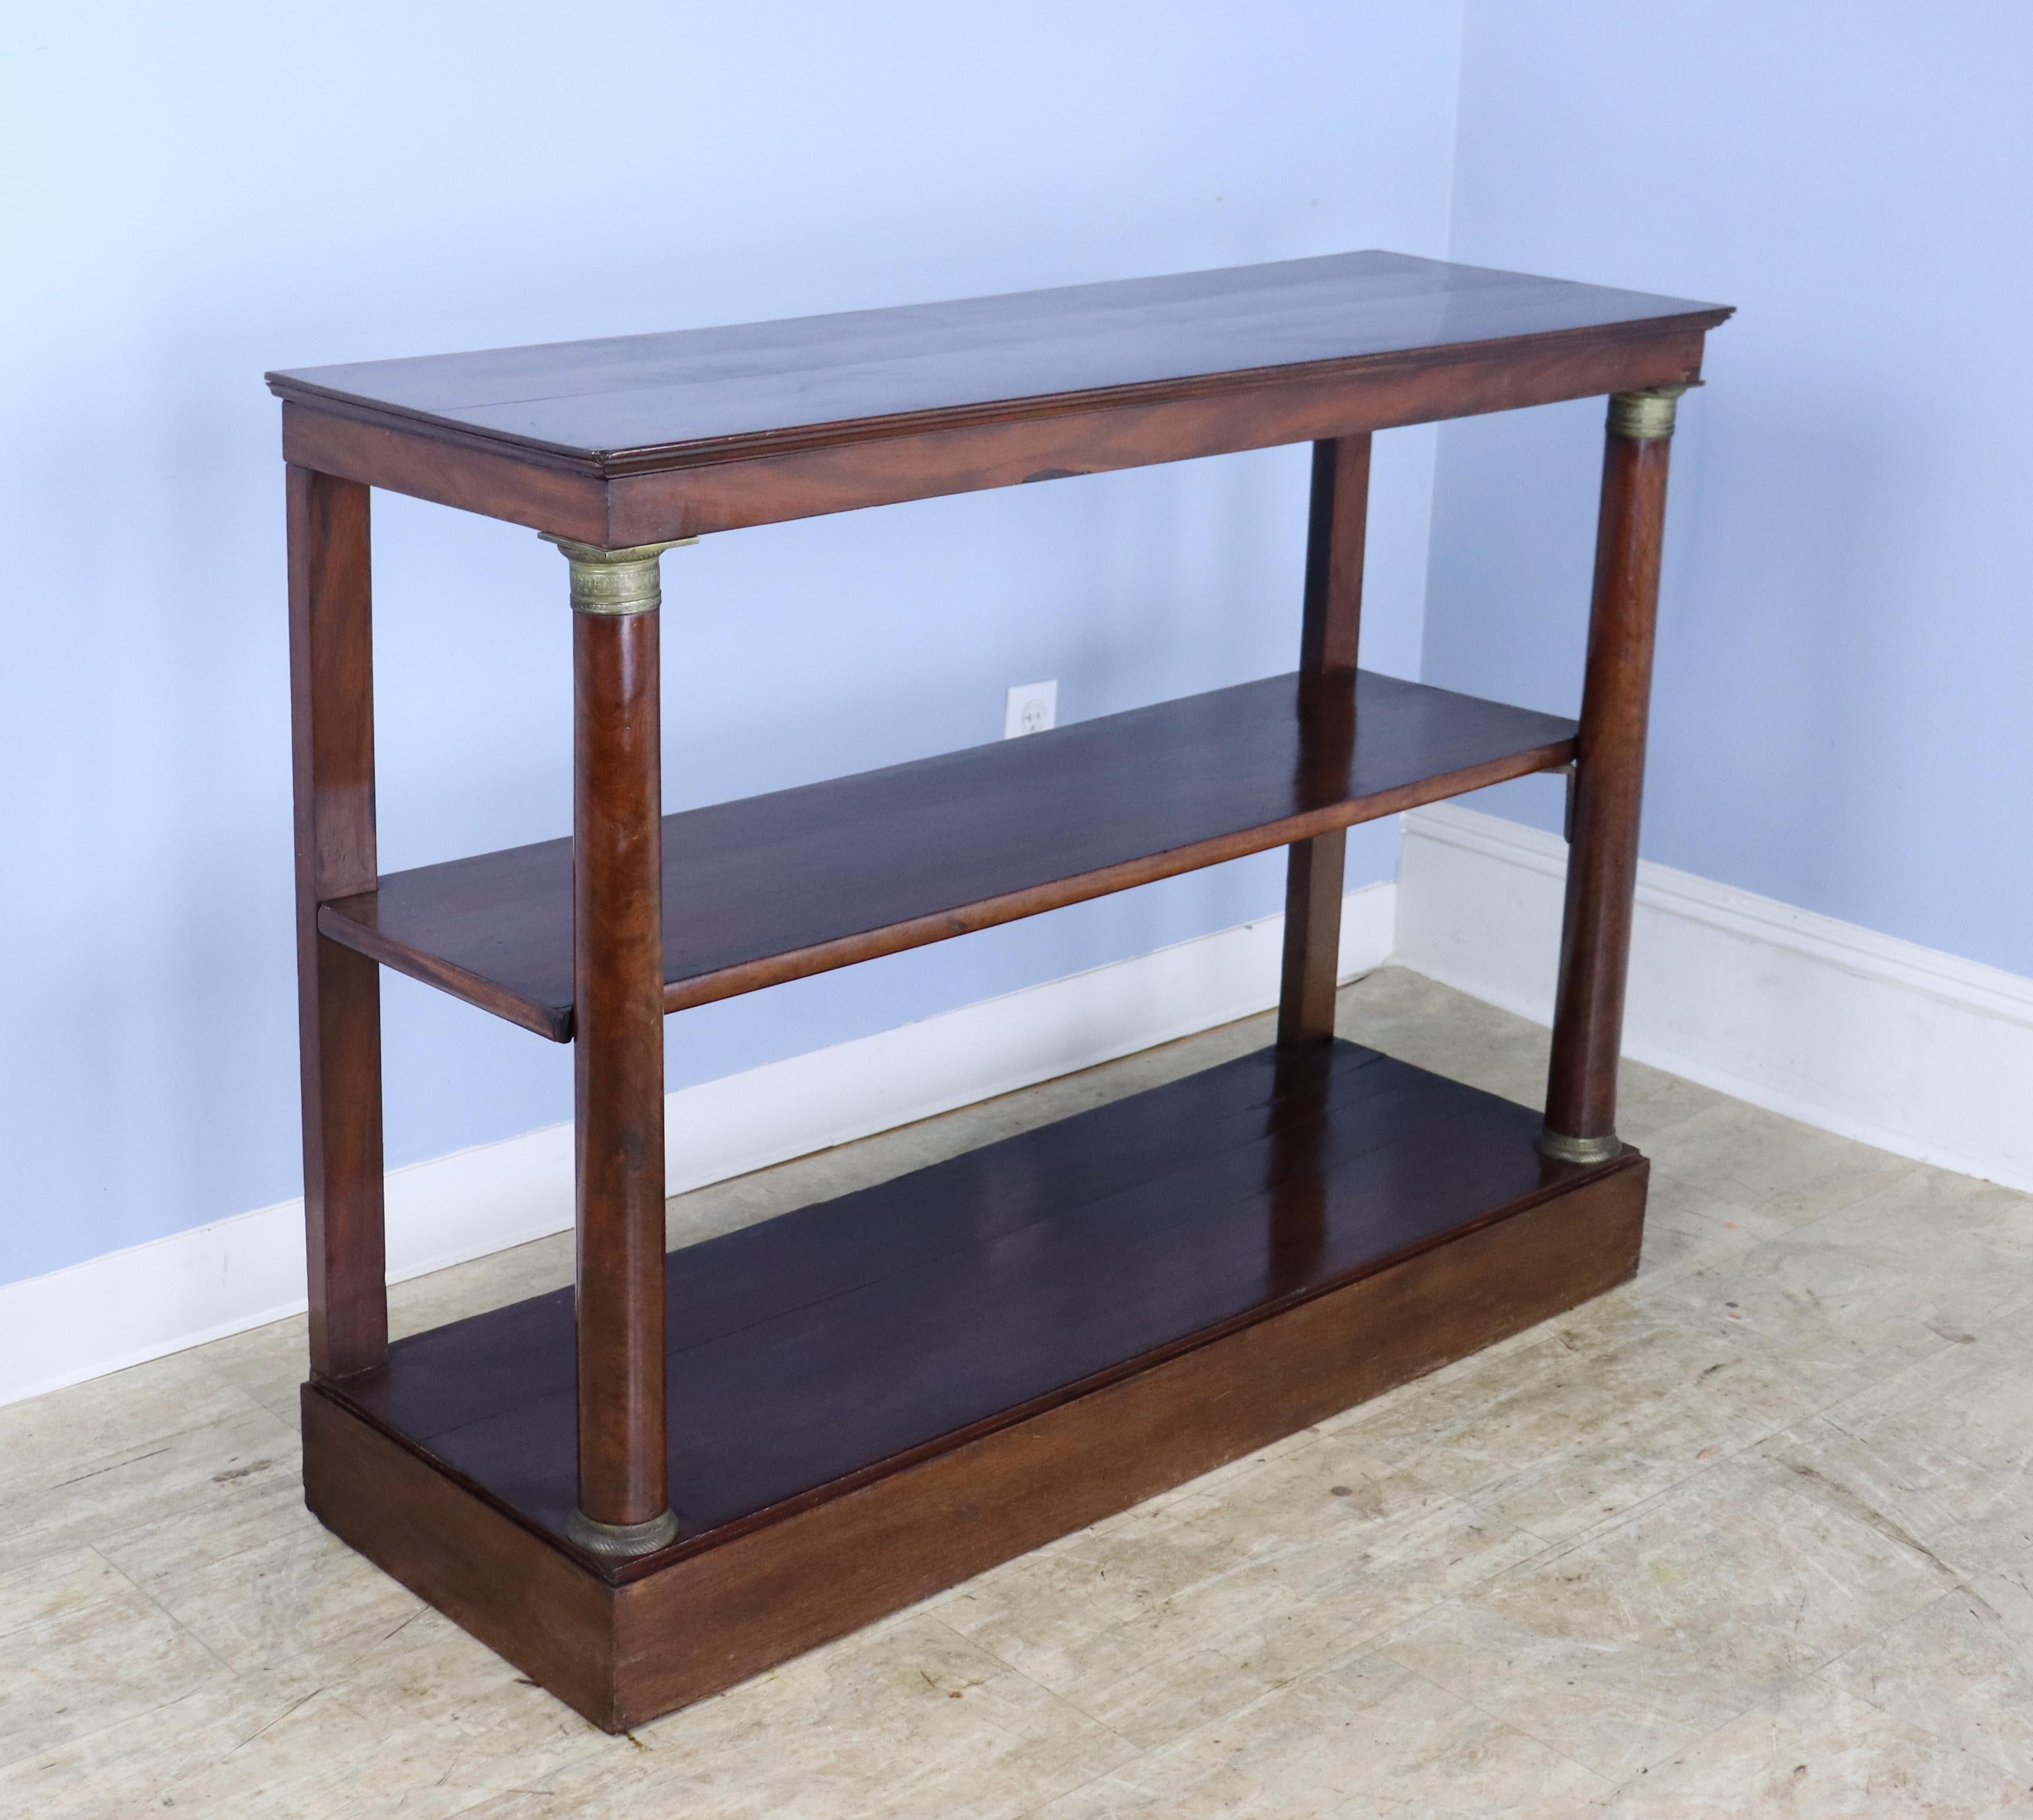 An elegant Empire style mahogany console with brass accents. The color and patina on the wood are very good. There are some areas of wear, highlighted in the thumbnail photographs.